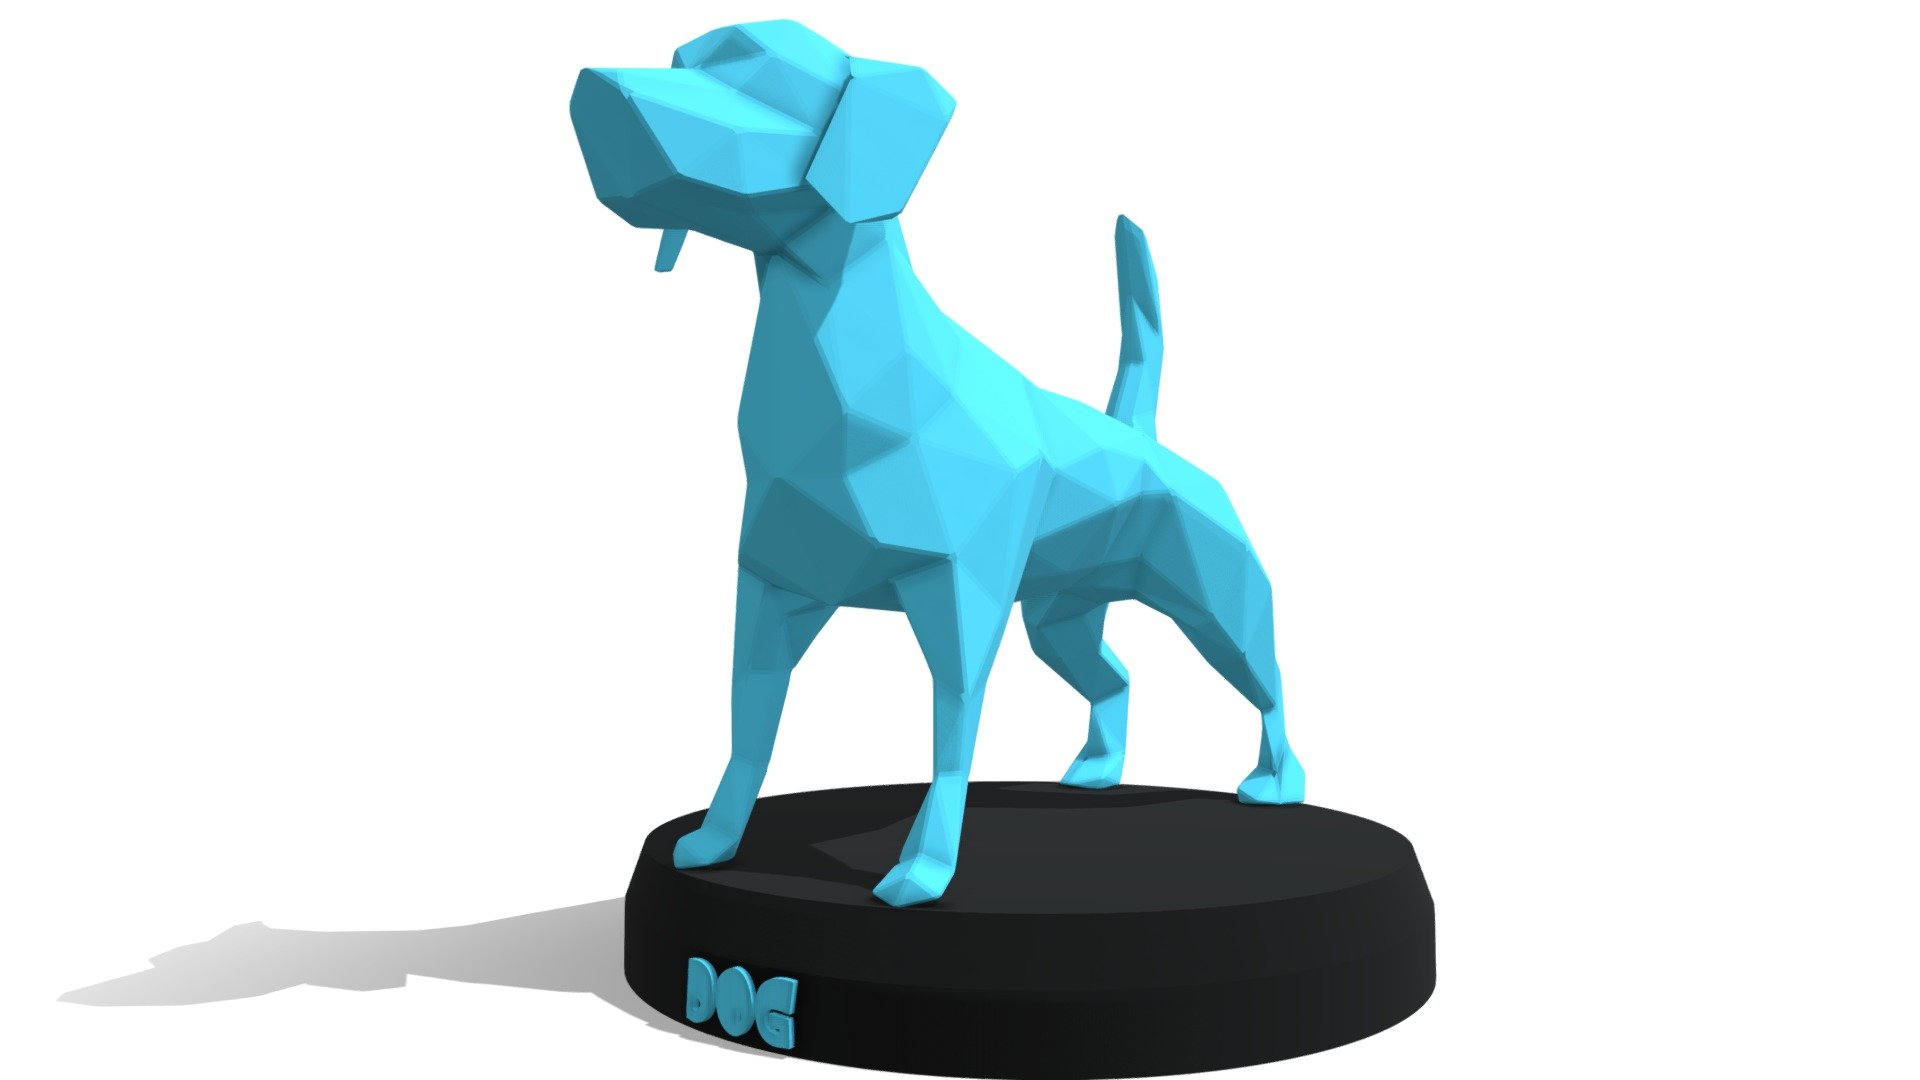 Polygonal 3D Model with Parametric modeling with gold material, make it recommend for :




Basic modeling 

Rigging 

sculpting 

Become Statue

Decorate

3D Print File

Toy

Have fun  :) - Poly Dog - Buy Royalty Free 3D model by Puppy3D 3d model